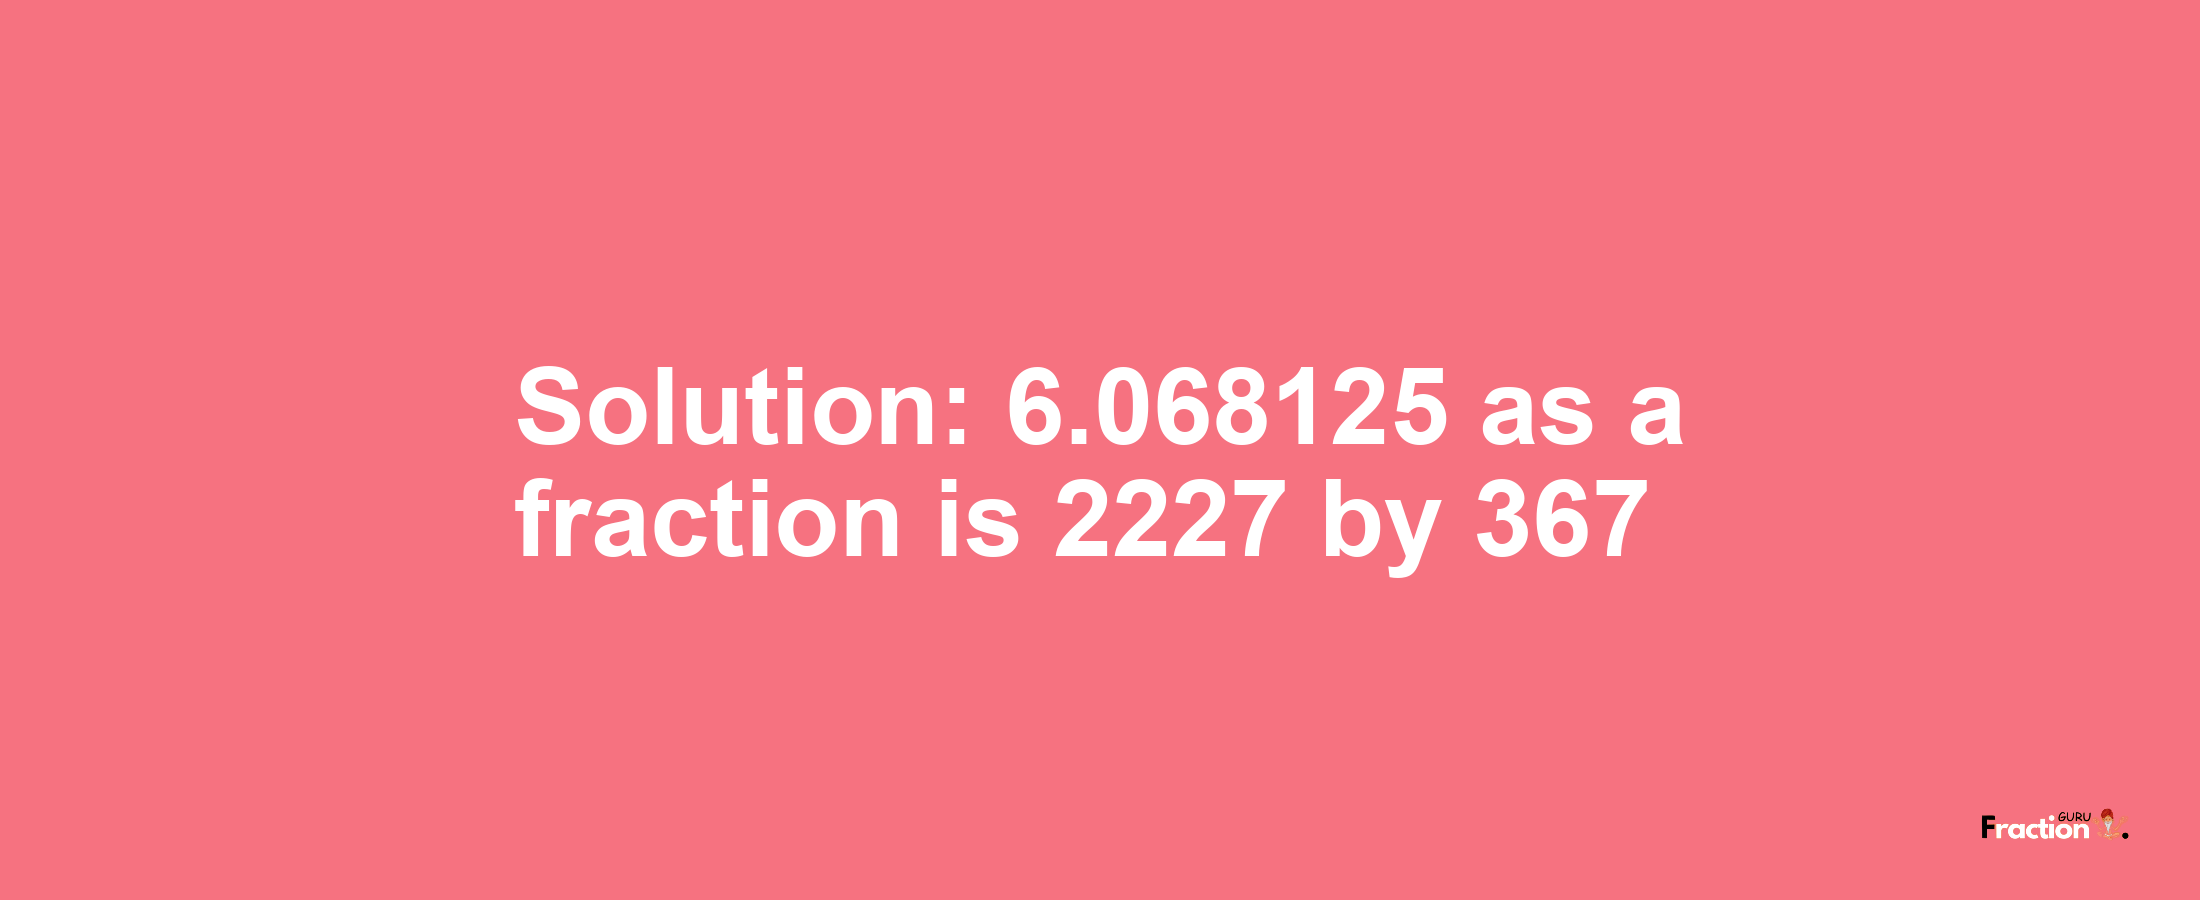 Solution:6.068125 as a fraction is 2227/367